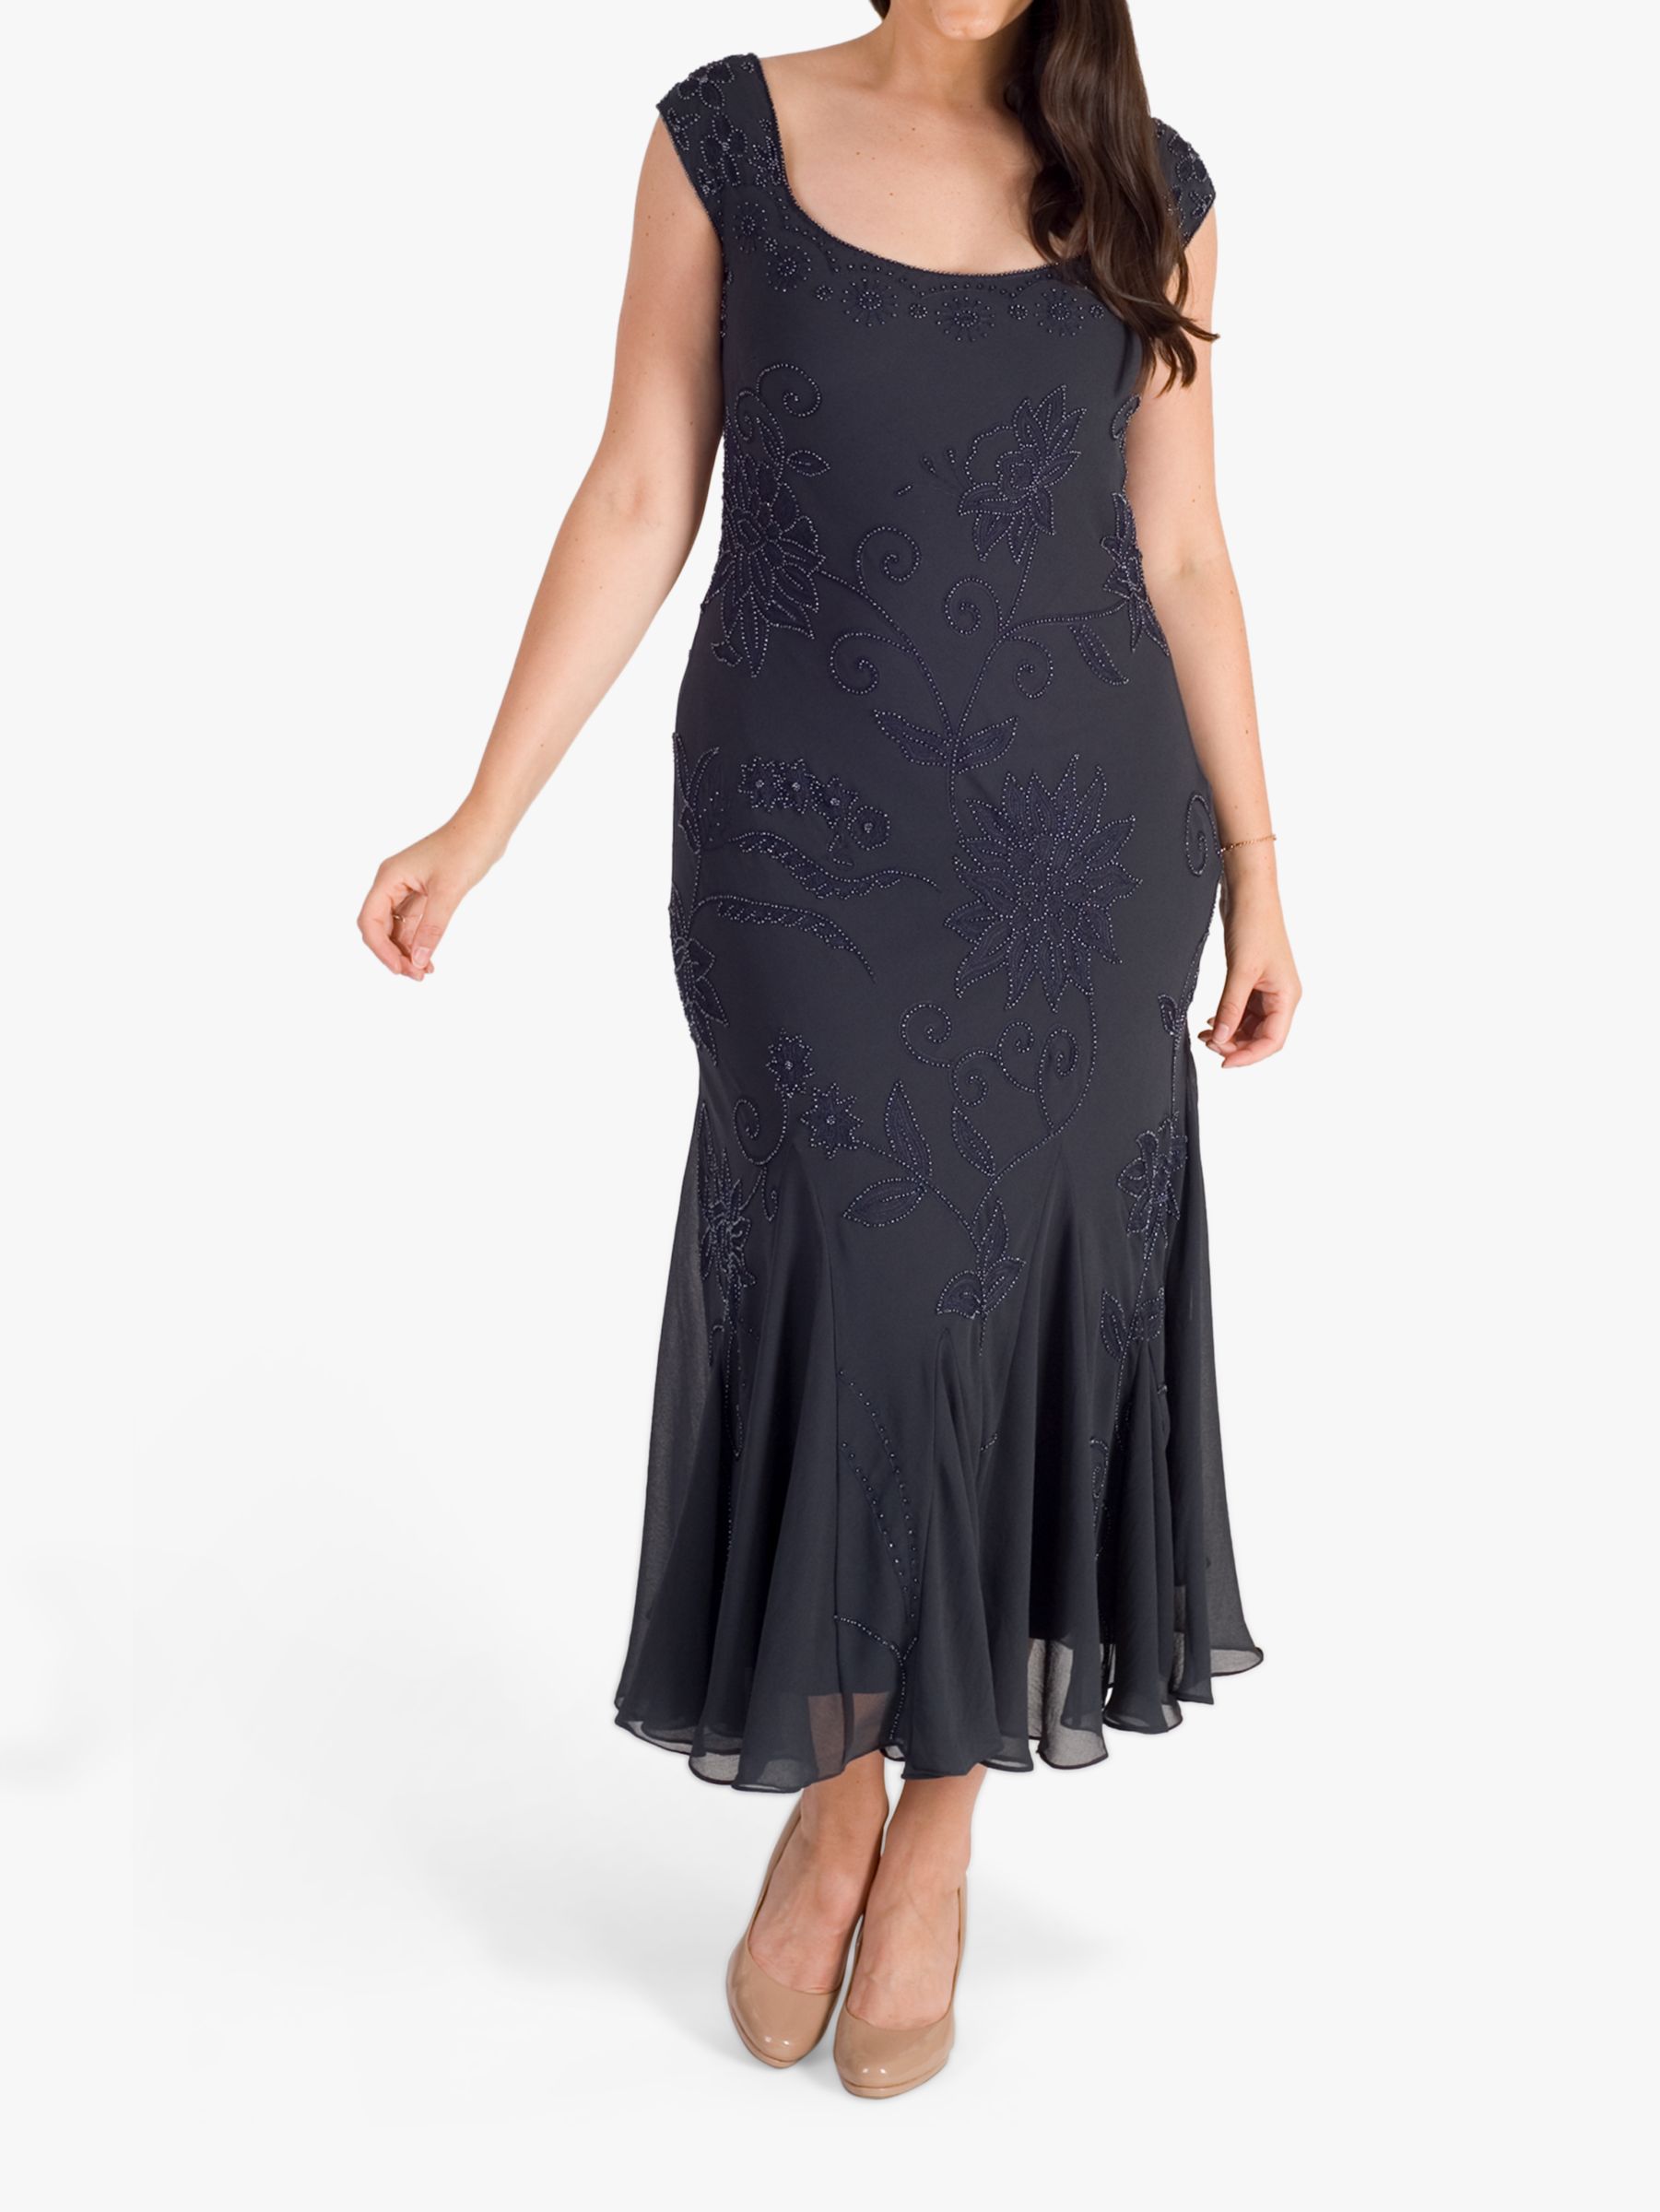 Chesca Beaded and Embroidered Dress, Pewter